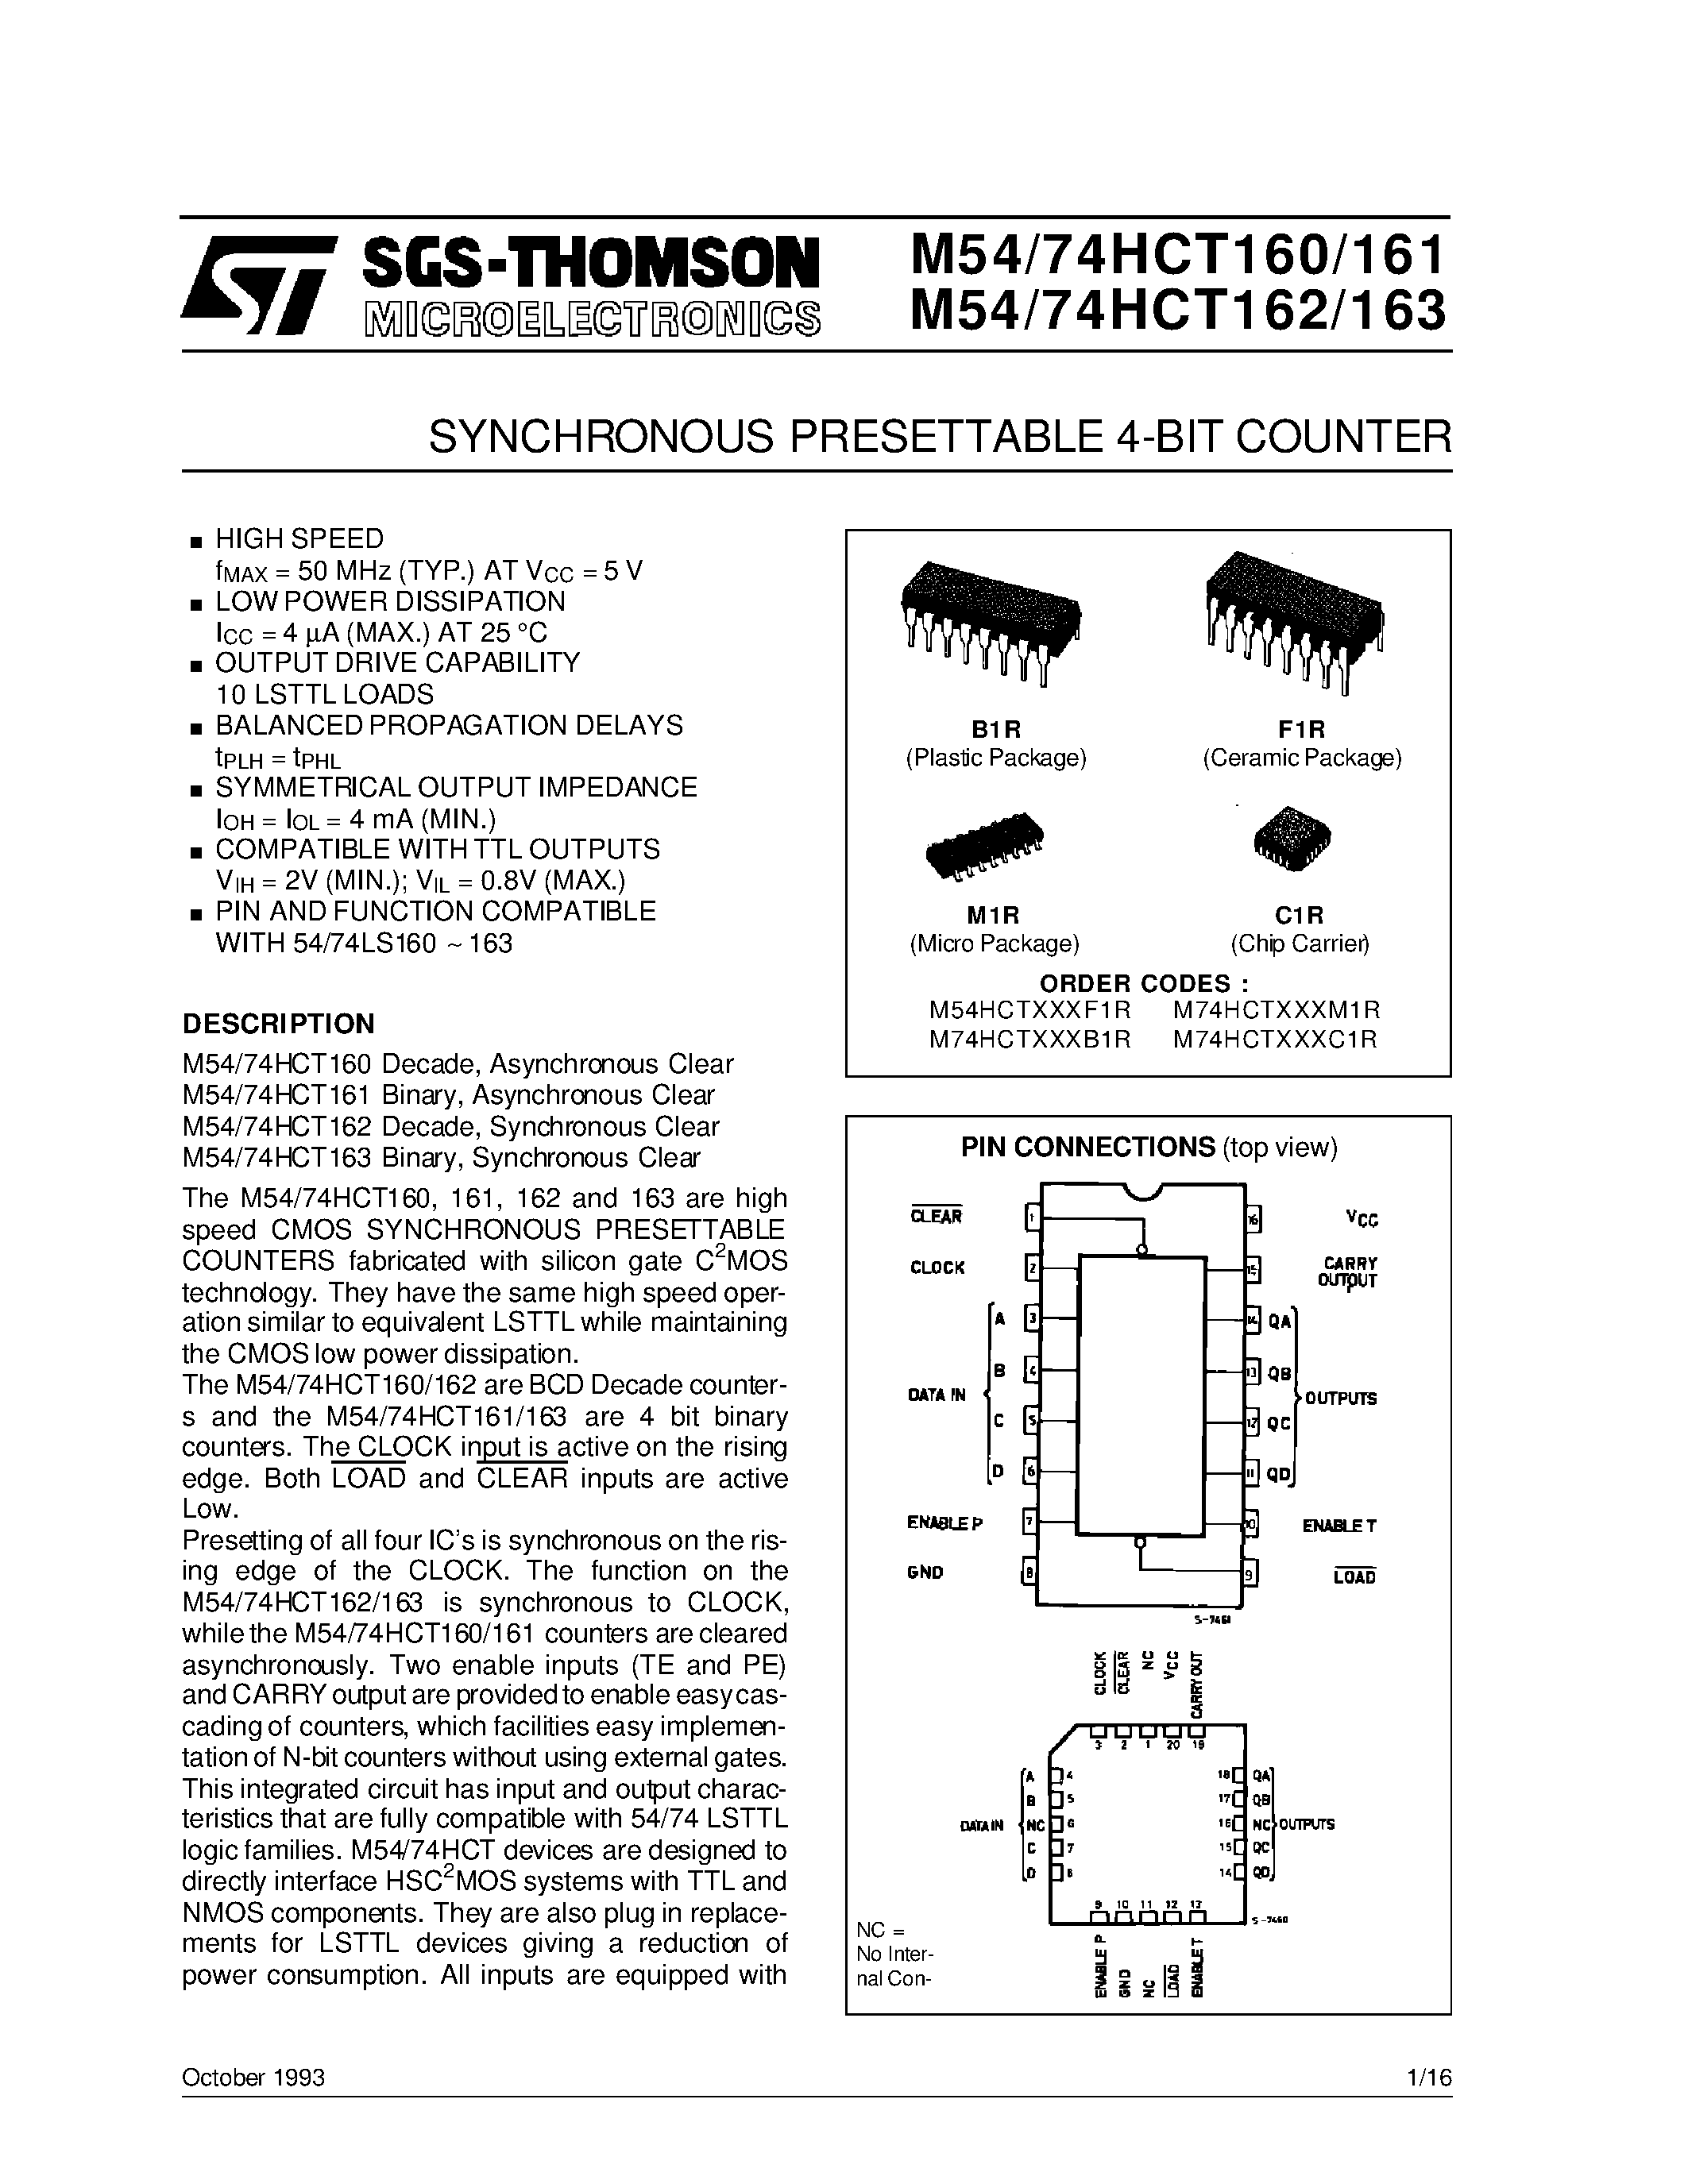 Datasheet M74HCT163 - SYNCHRONOUS PRESETTABLE 4-BIT COUNTER page 1